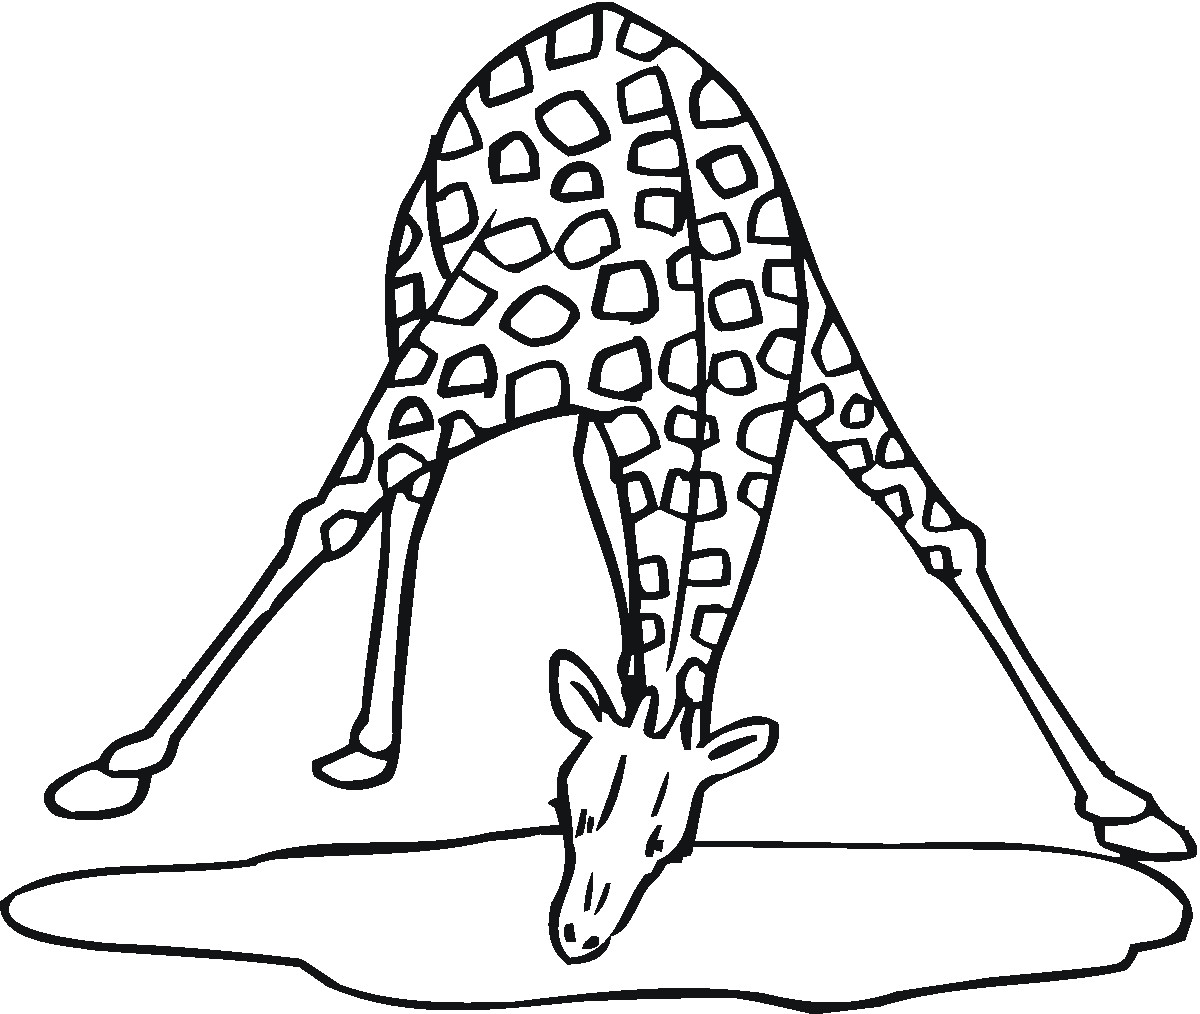 Coloring Pages For Teens Of Zebra And Giraffe Together
 Top 11 Free Printable Giraffe Coloring Pages For Kids